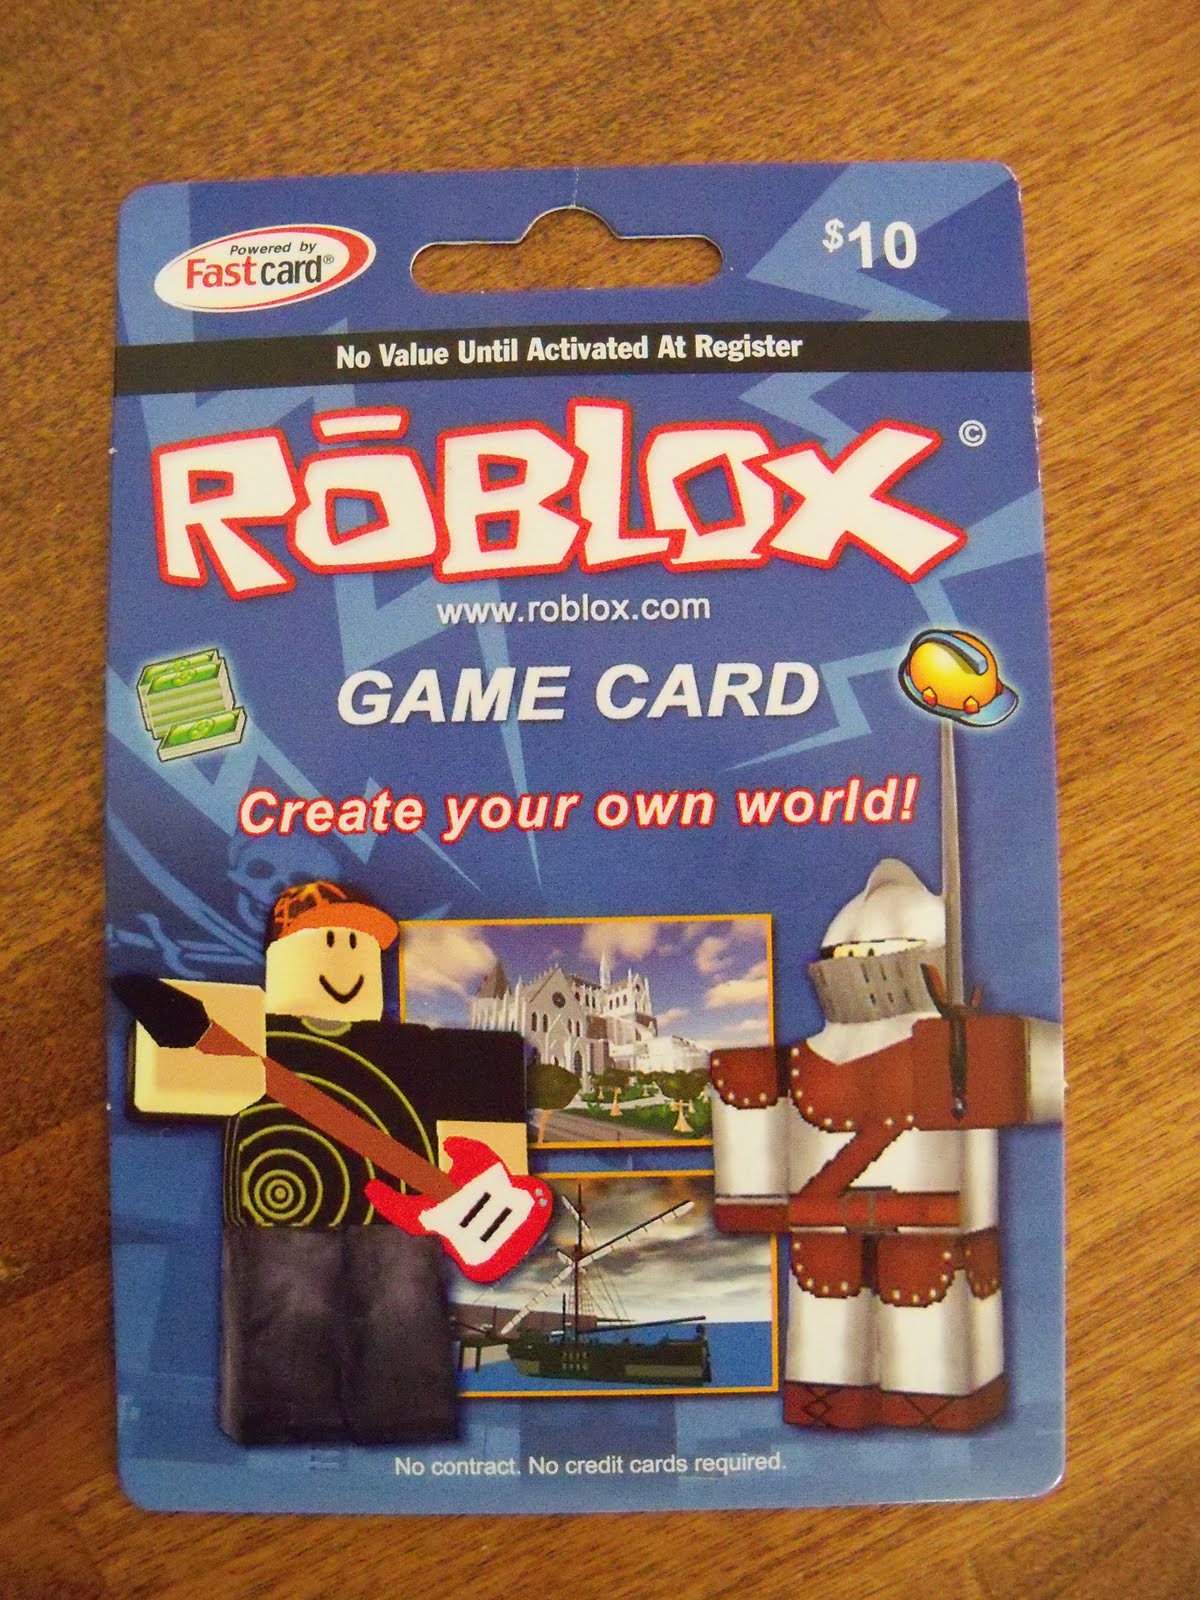 Savings Chatter Best Buy 10 Roblox Card For Free - best buy 10 roblox card for free